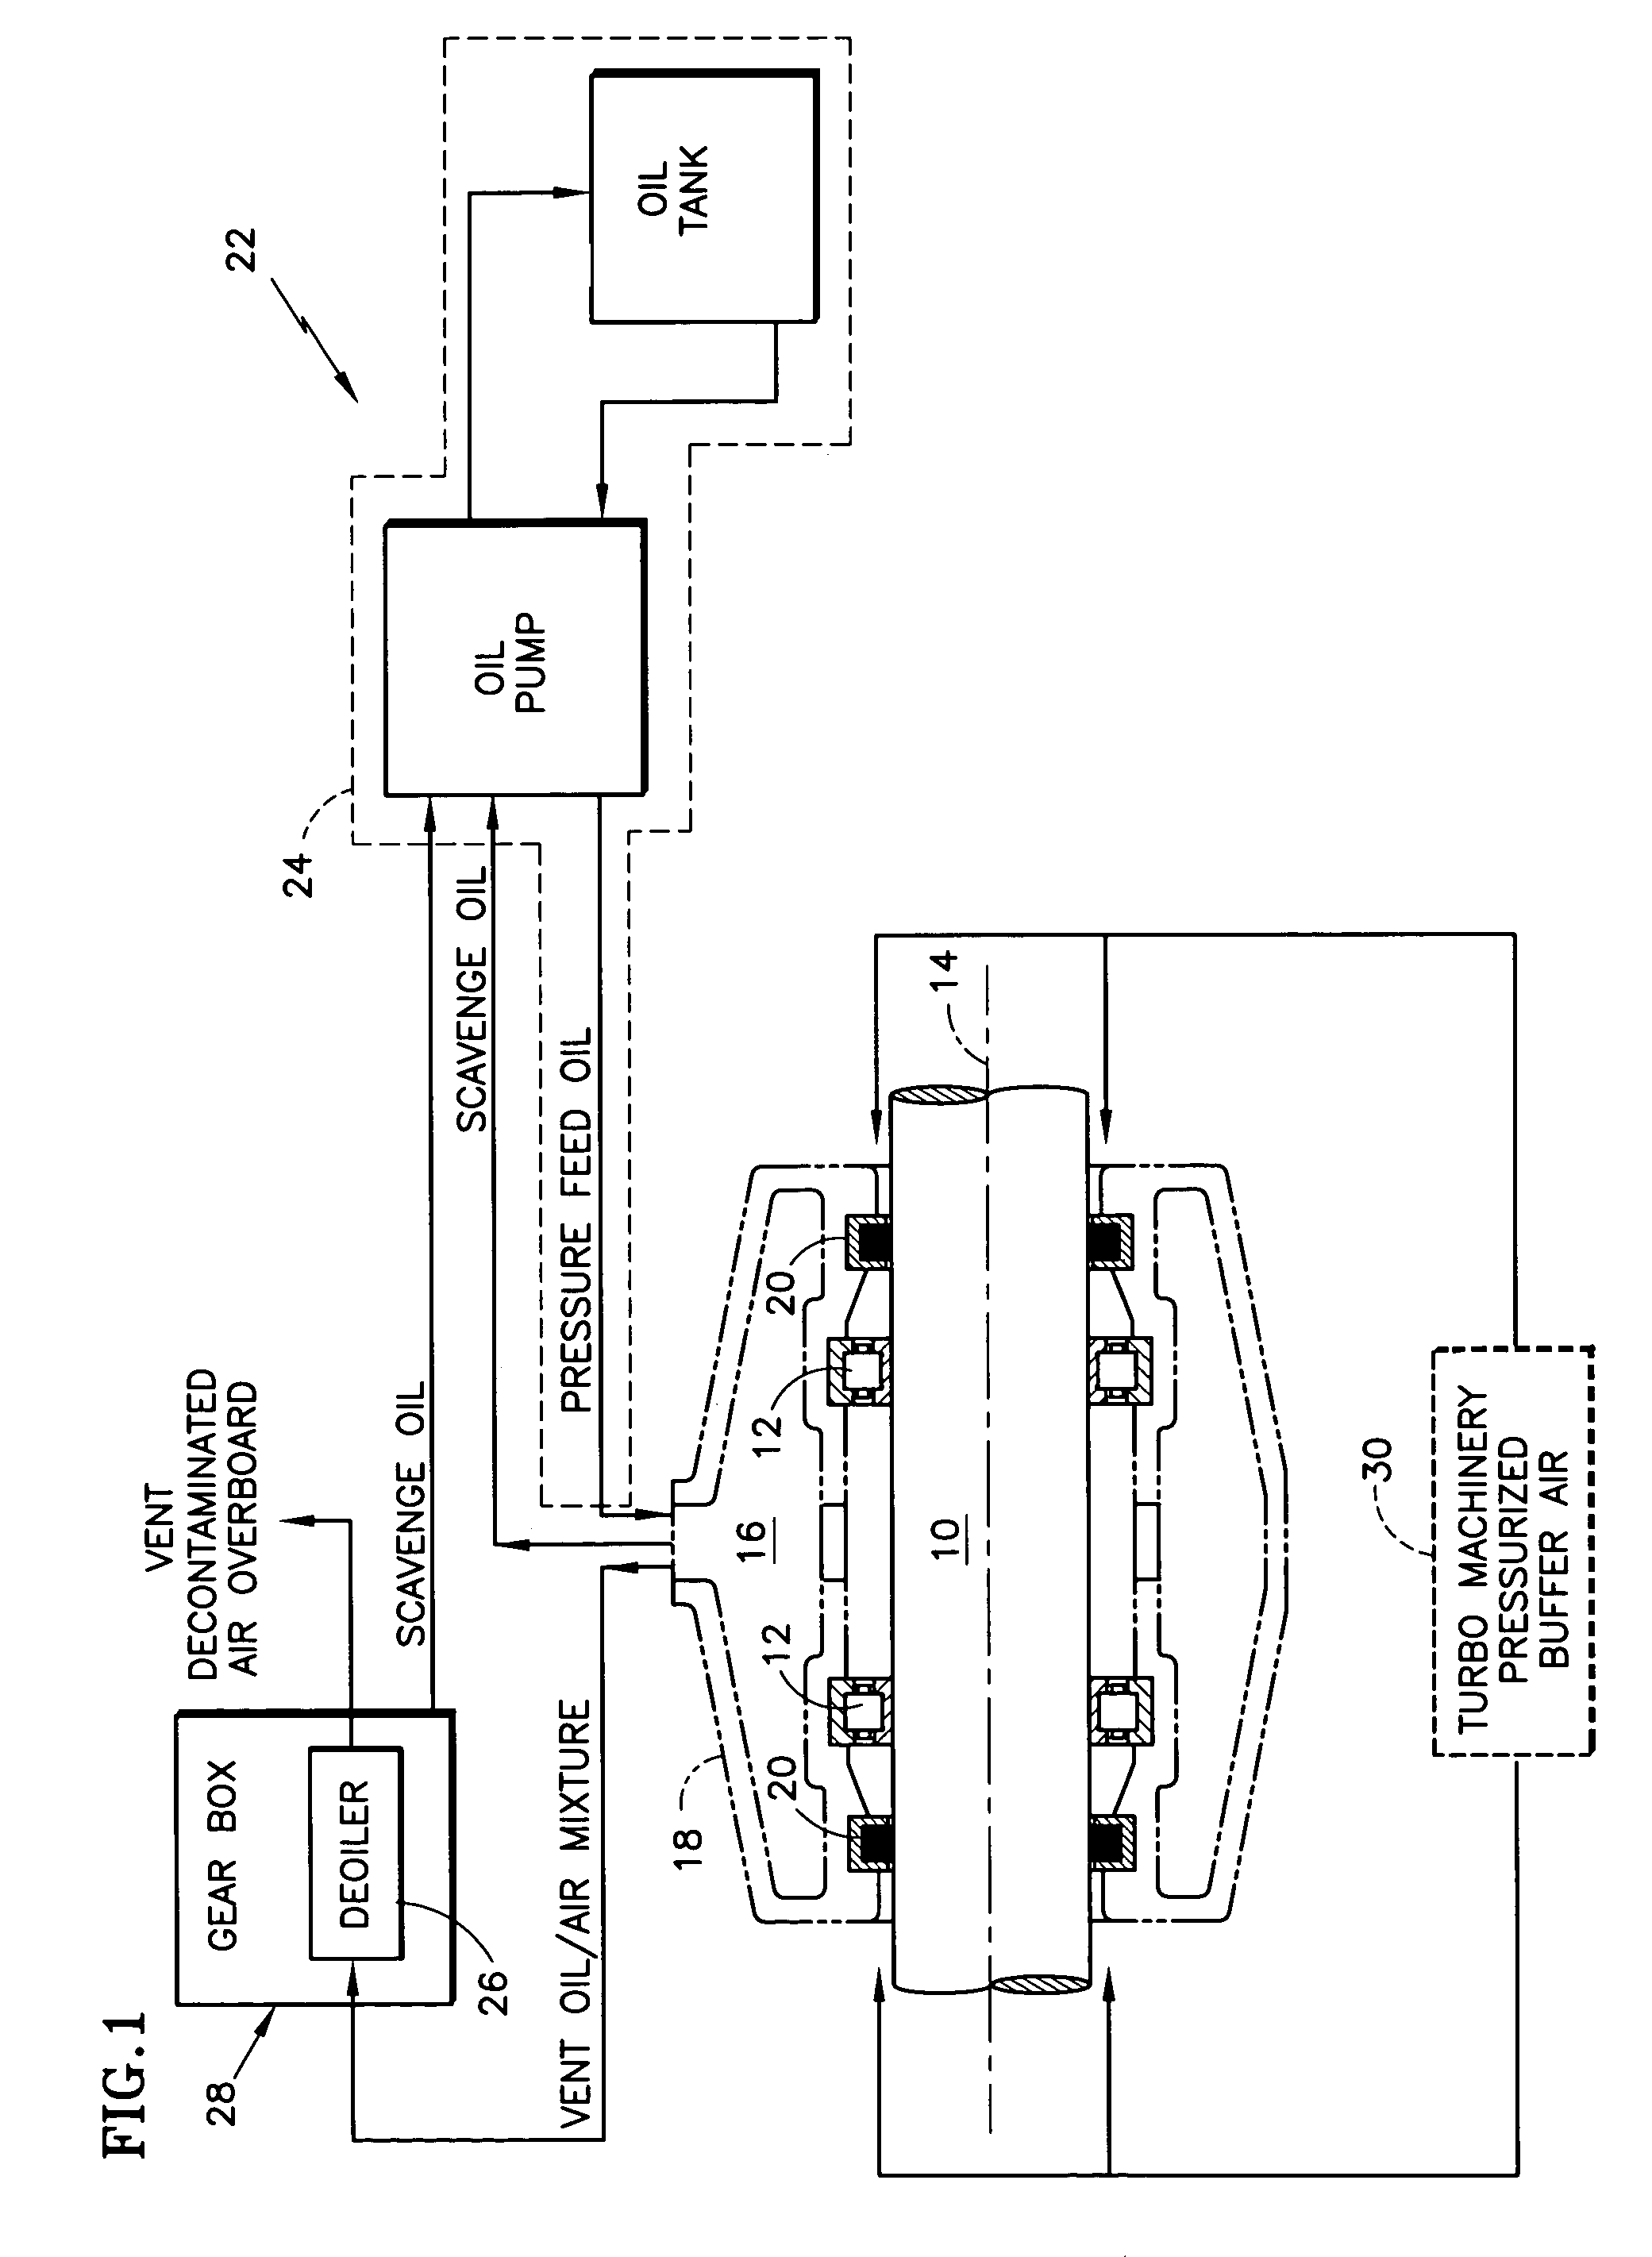 Deoiler for a lubrication system